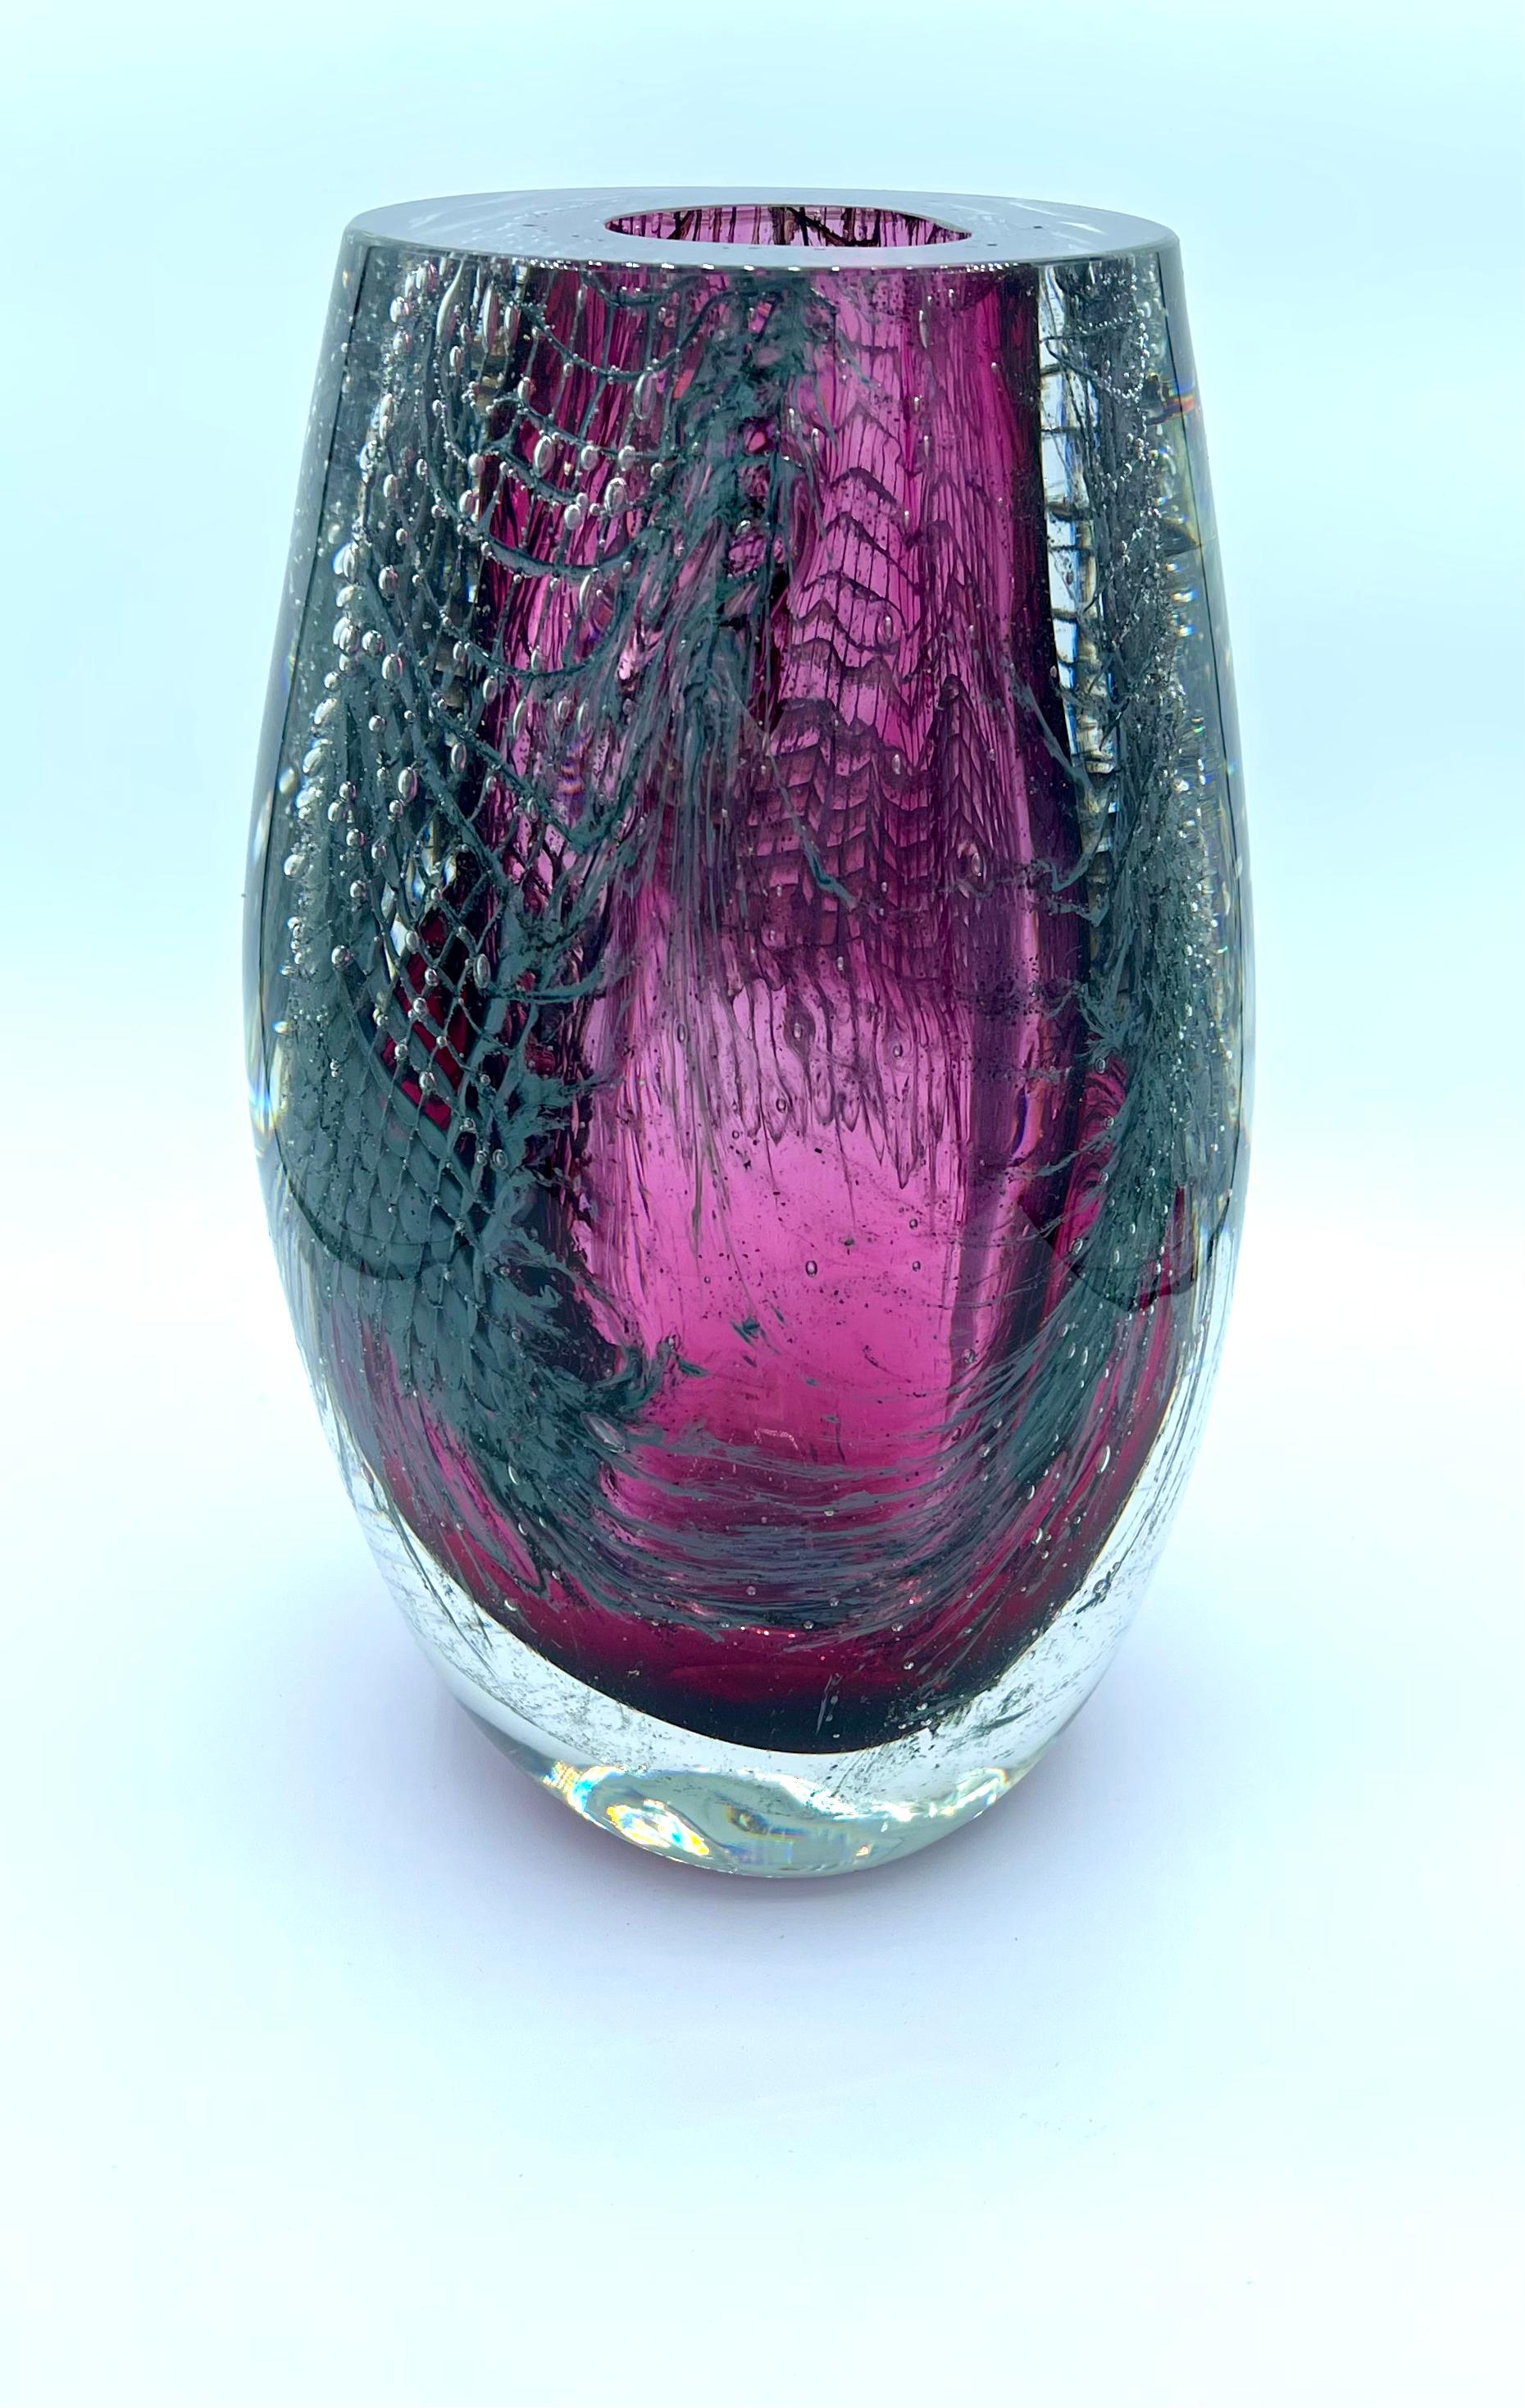 Our vases are crafted by blowing a glass bubble into an aluminum net. Upon contact with the hot glass, the aluminum melts, generating bubbles and leaving behind glossy residues. The color and motion effects of these tiny bubbles lend the structure